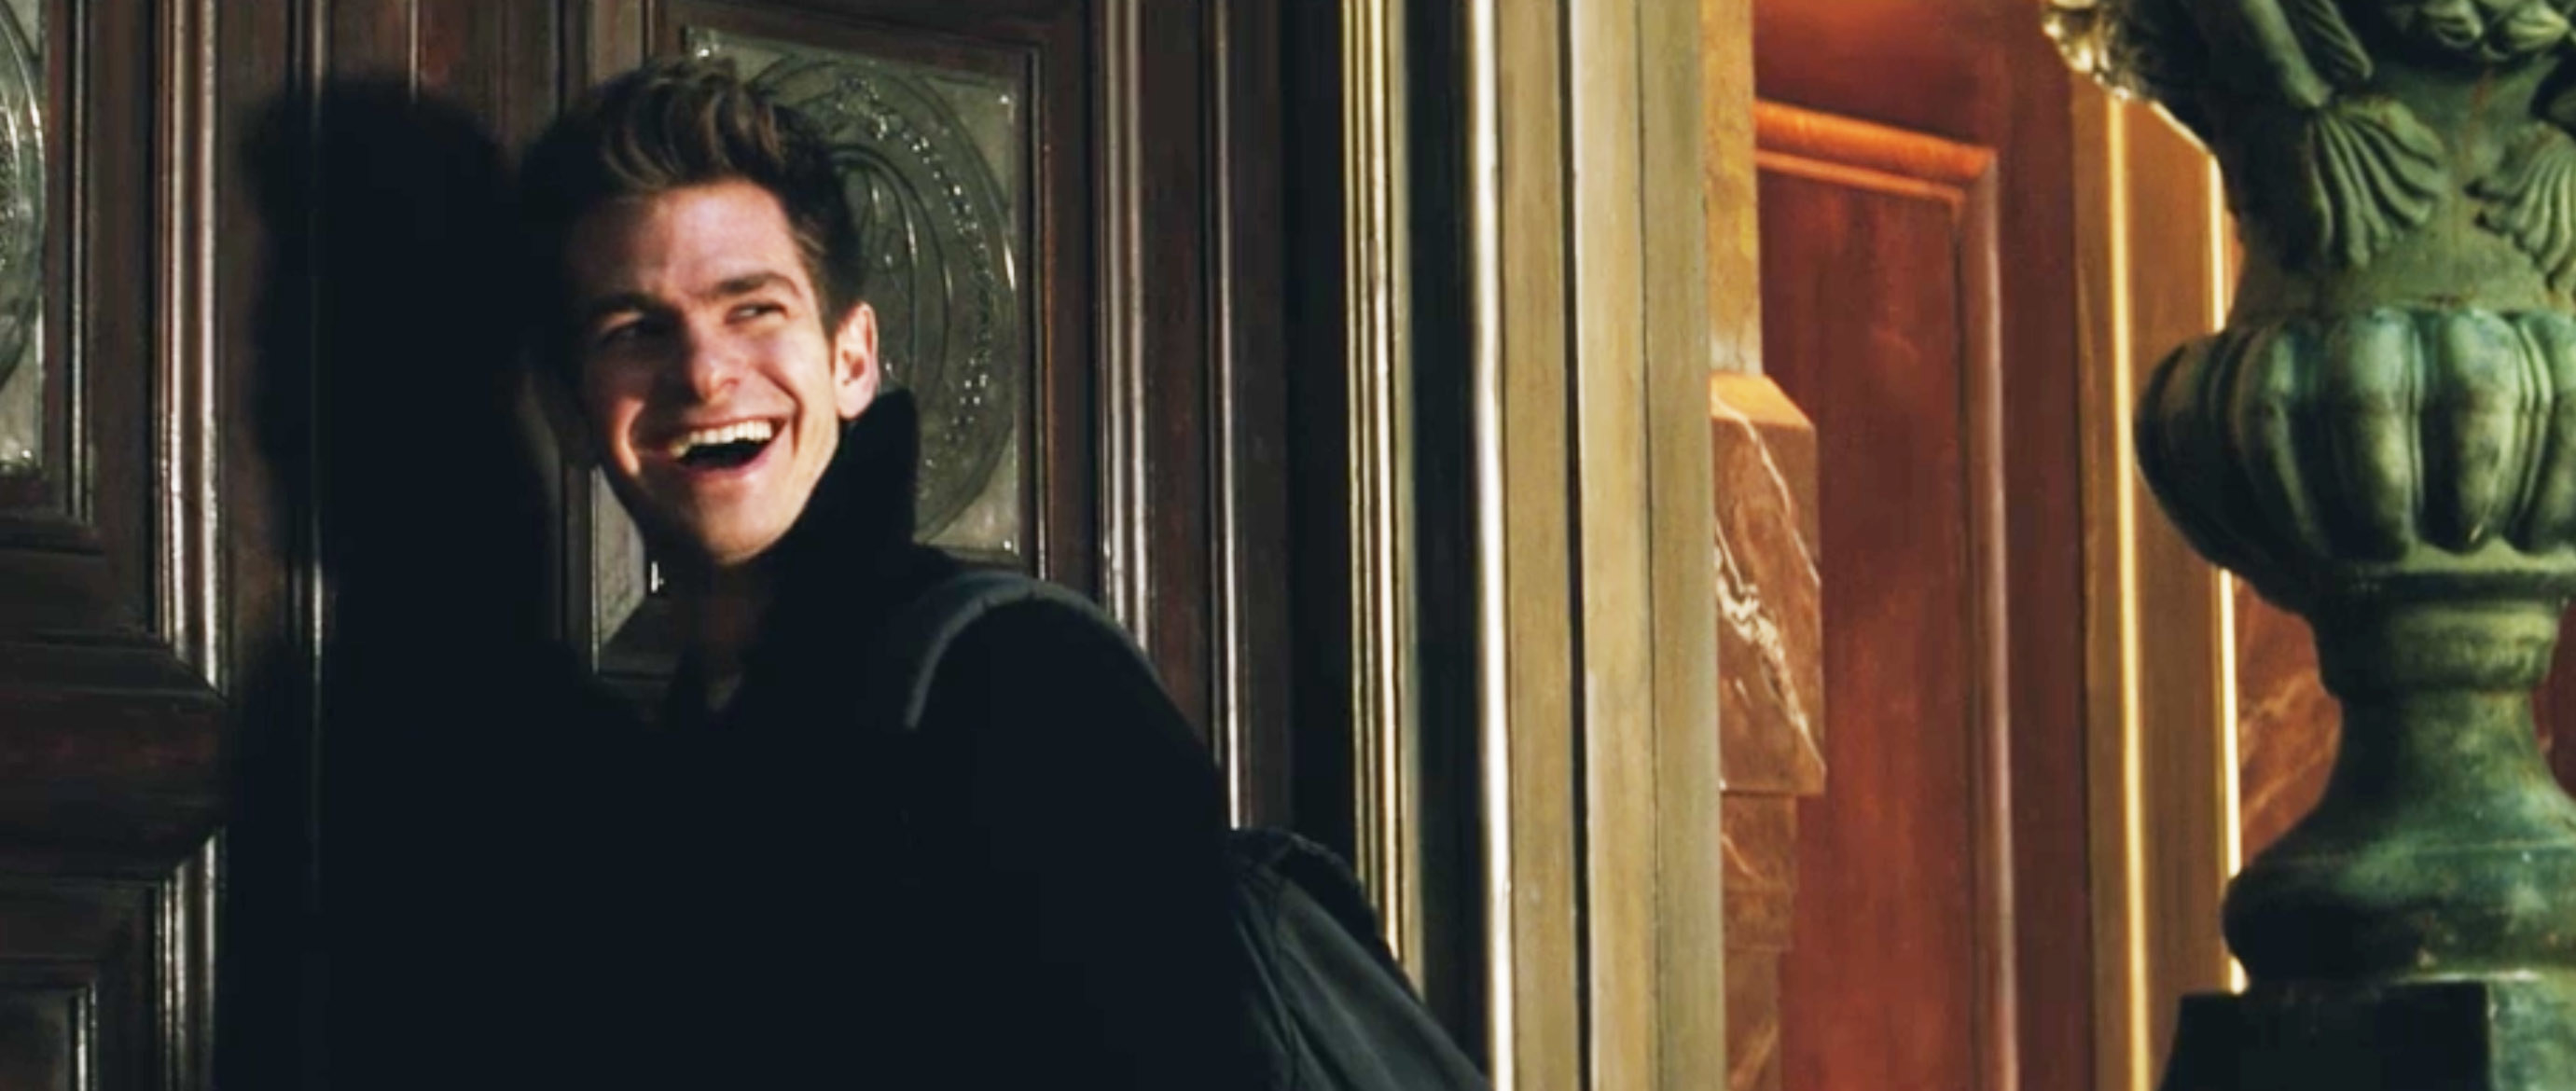 Andrew smiling as he stands in front of a door in a scene from Spider-Man